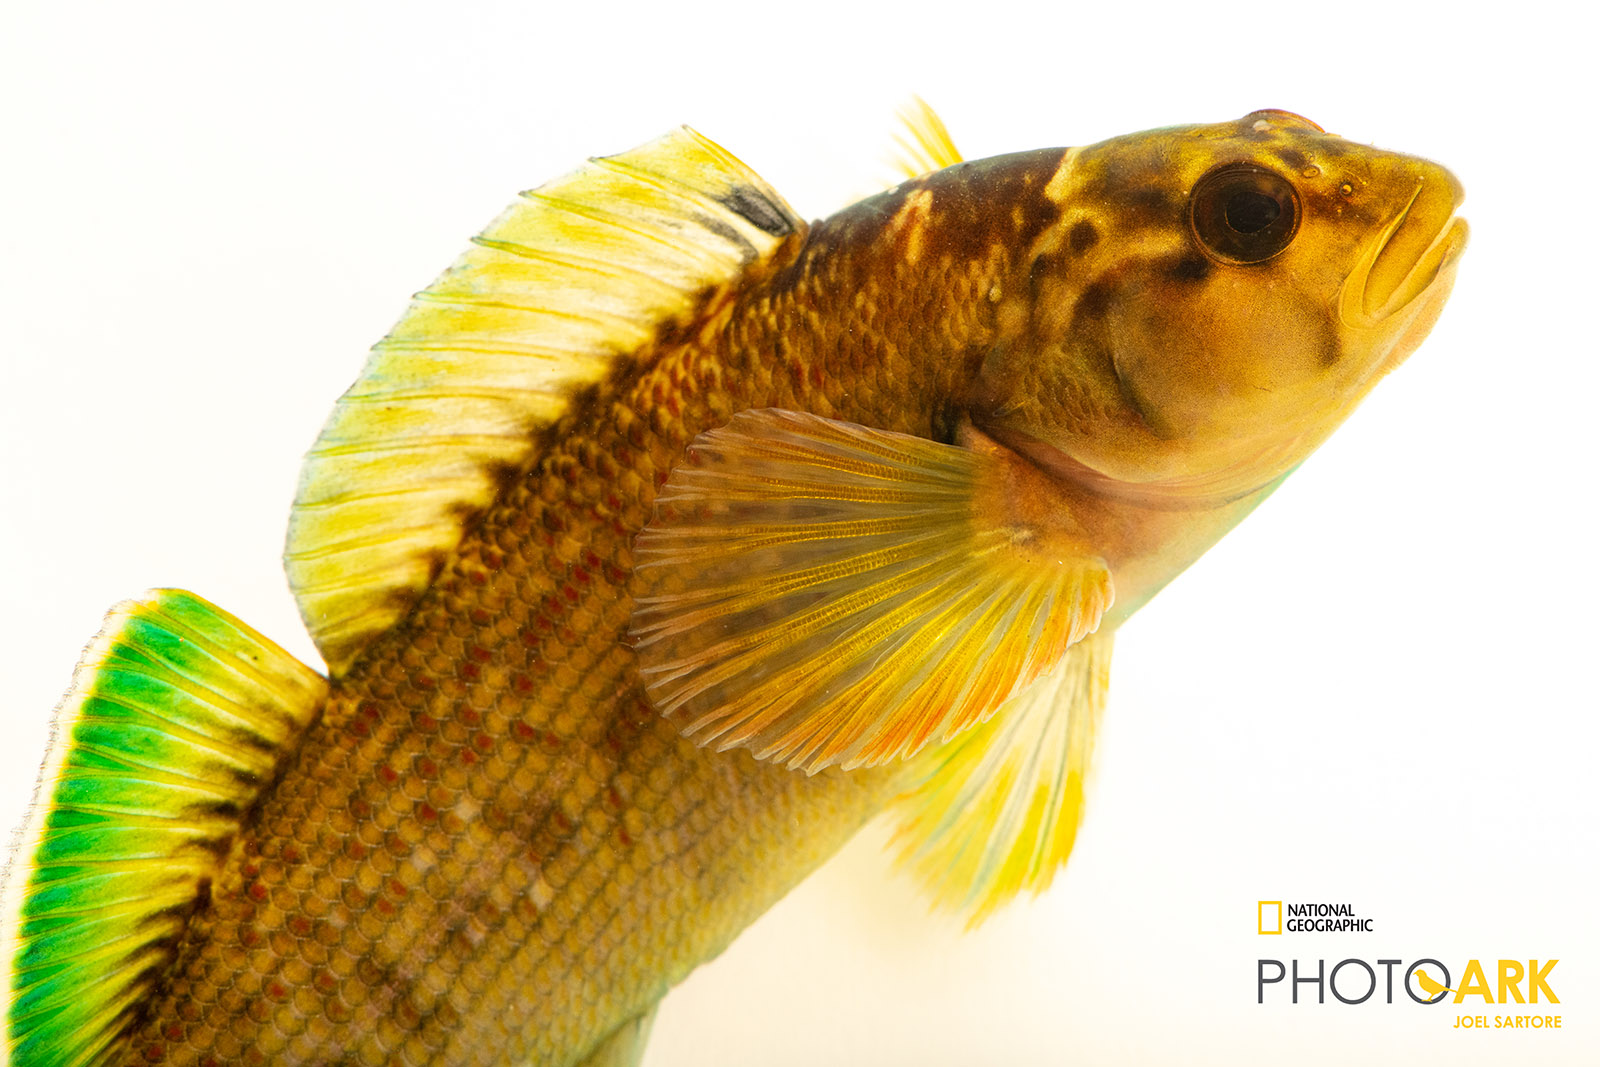 An image of a orange darter with a green fin on its back; one of our many native fish